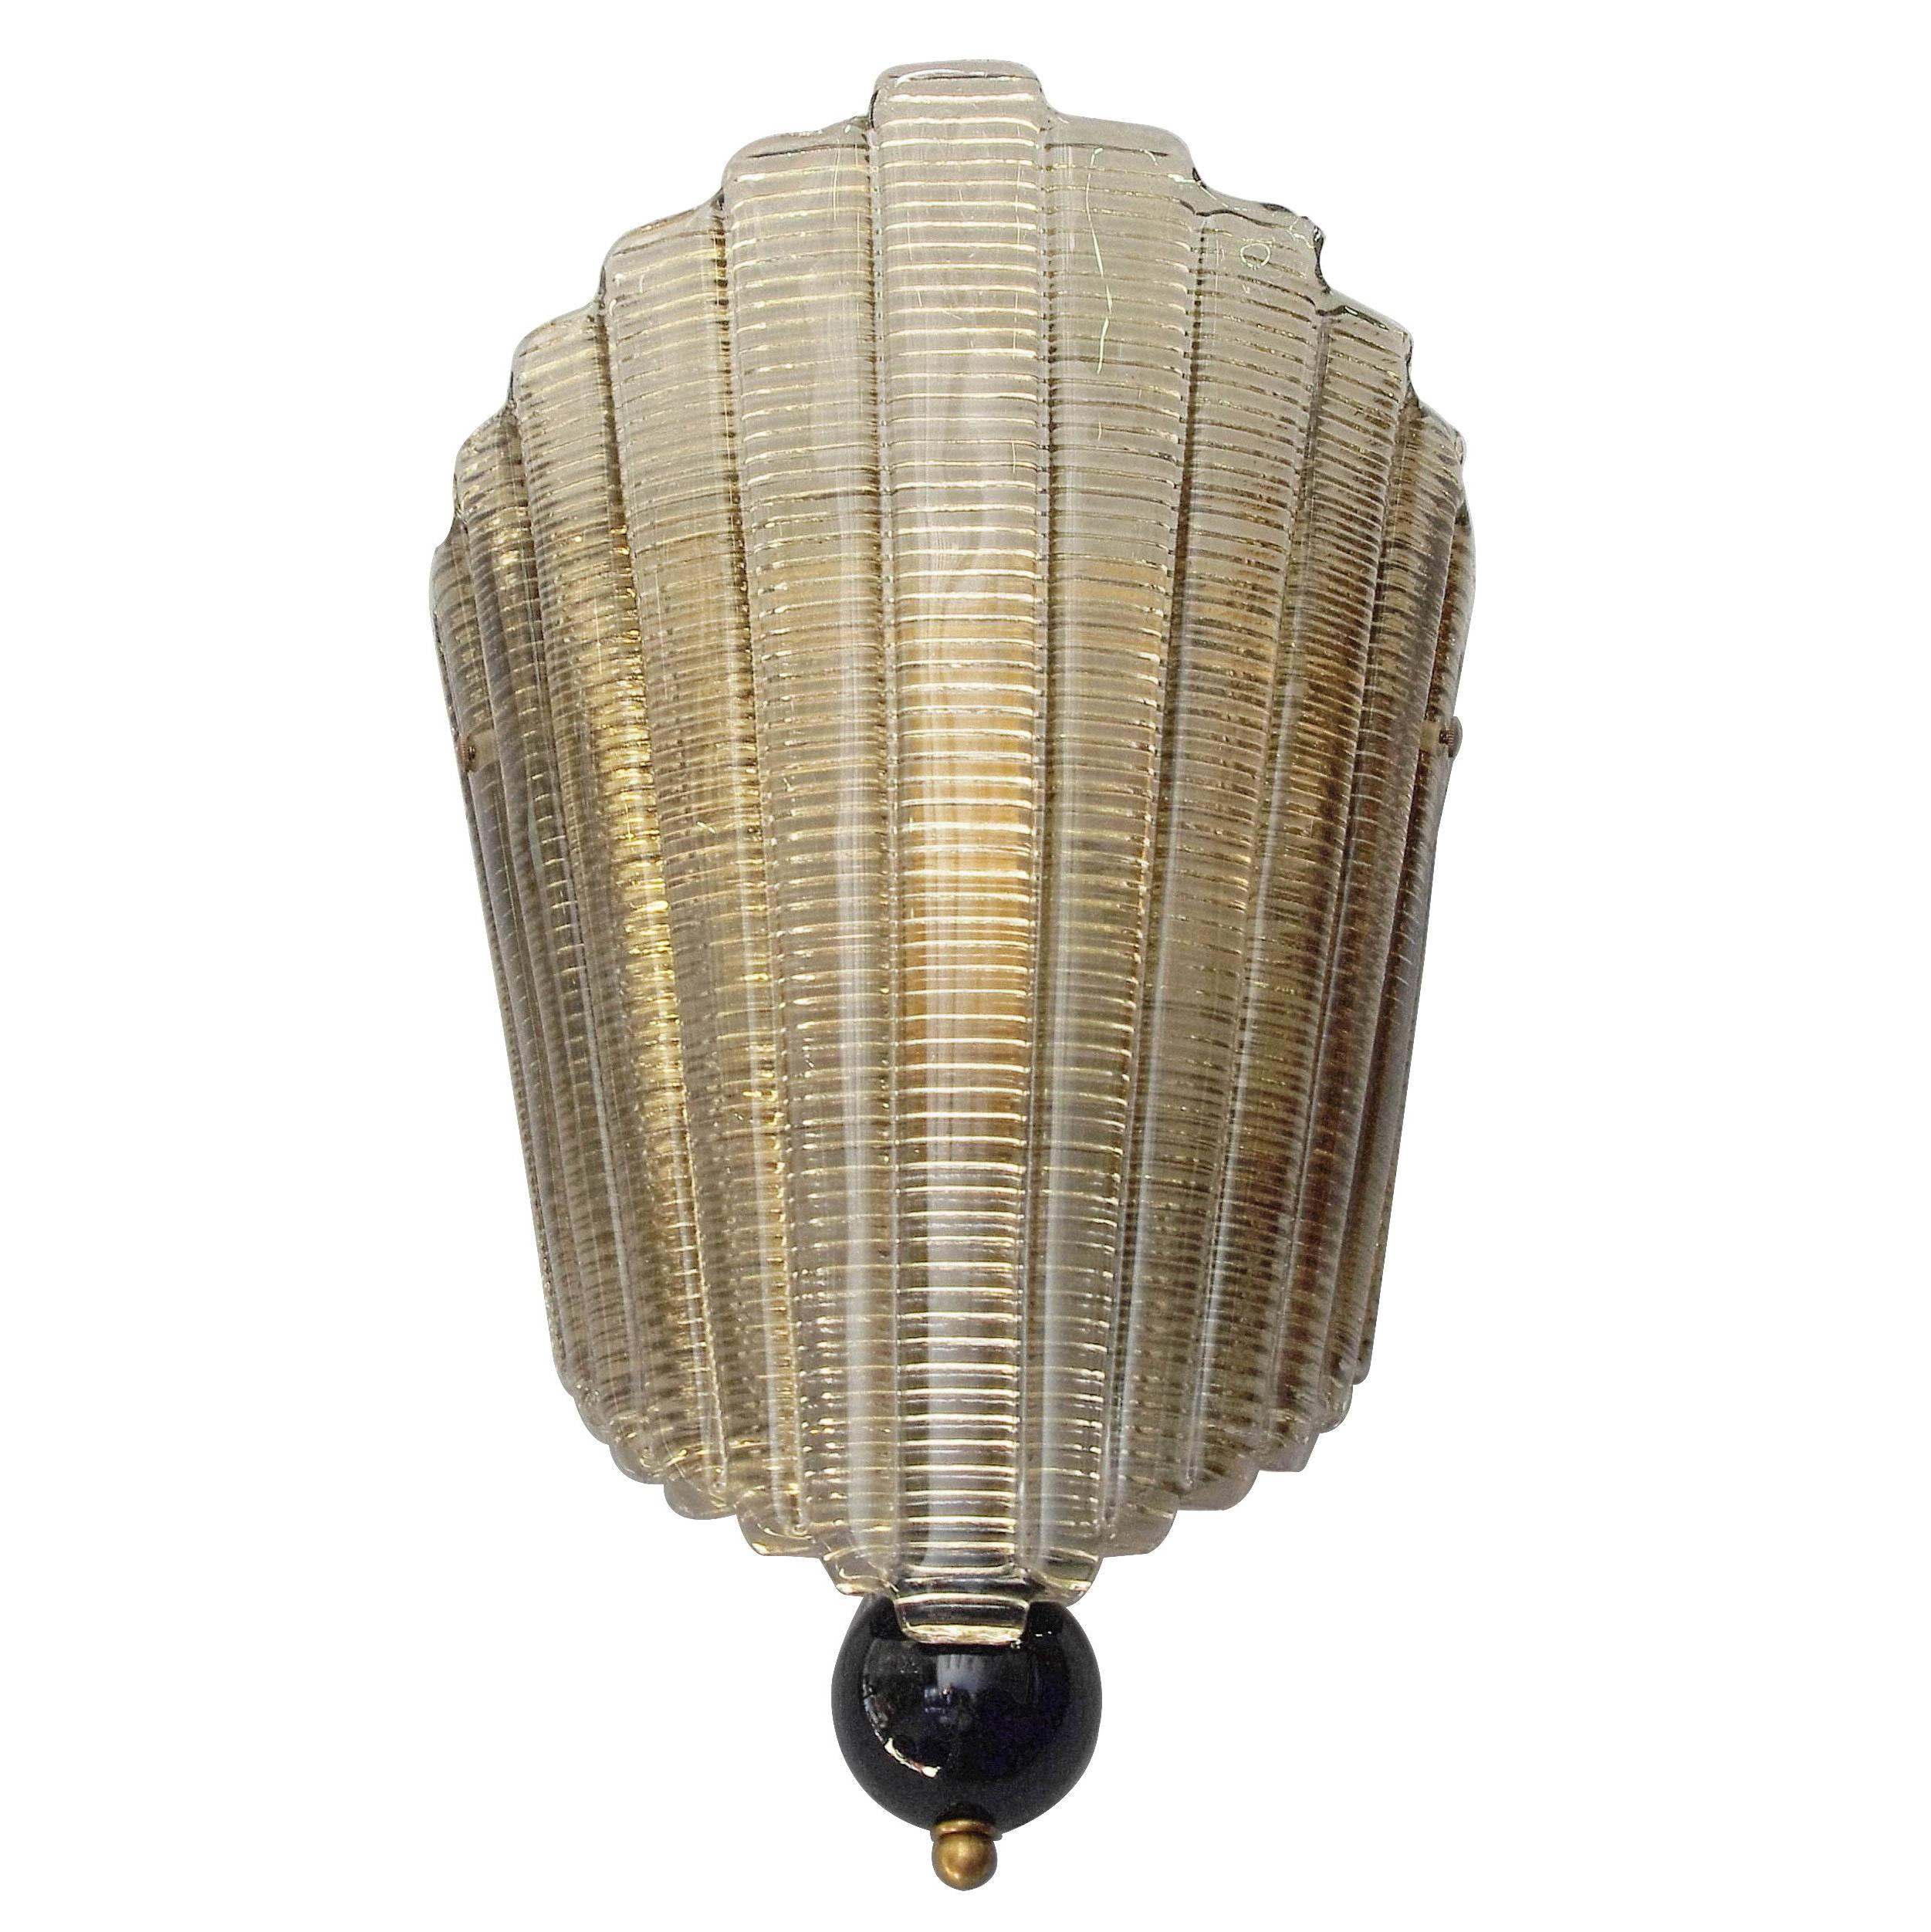 Italian wall sconces shown in smoky Murano glass and brass details
One light / E26 type / max 40W each
Measures: Height 17 inches, width 11 inches, depth 6.5 inches
A pair currently in stock in Palm Springs on summer sale! at $2,879.

 